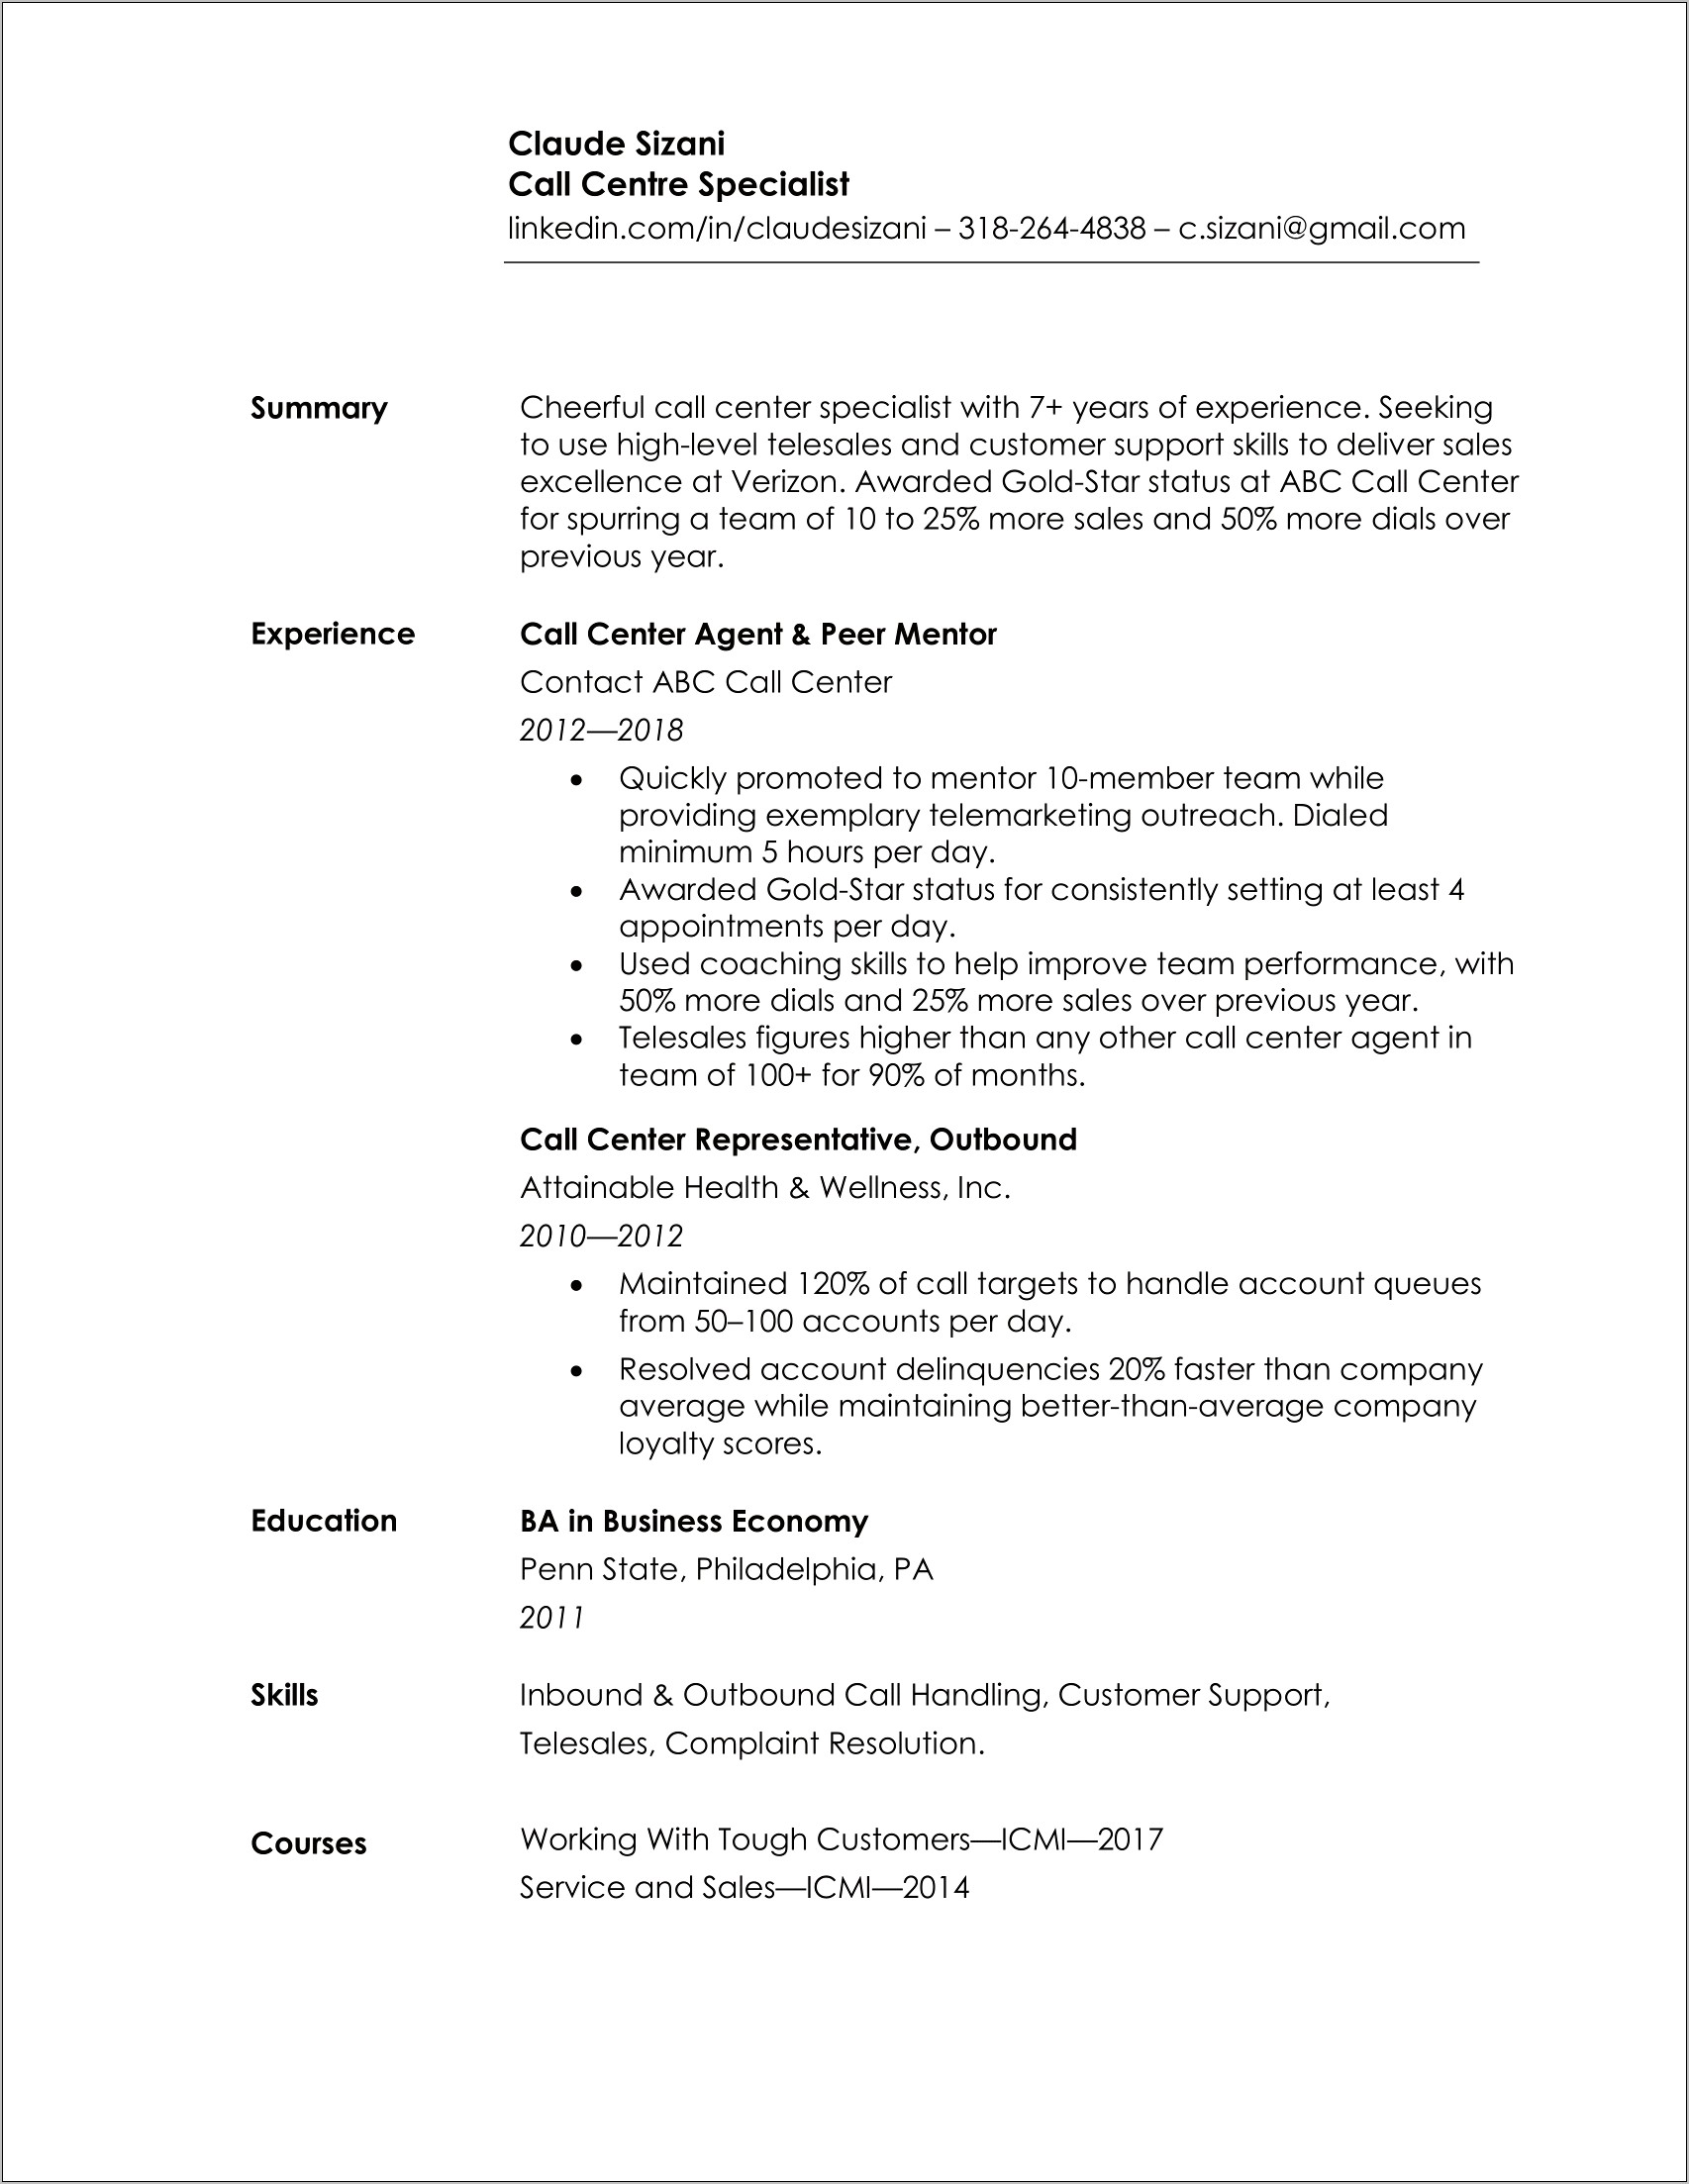 Best Format To Save Your Resume